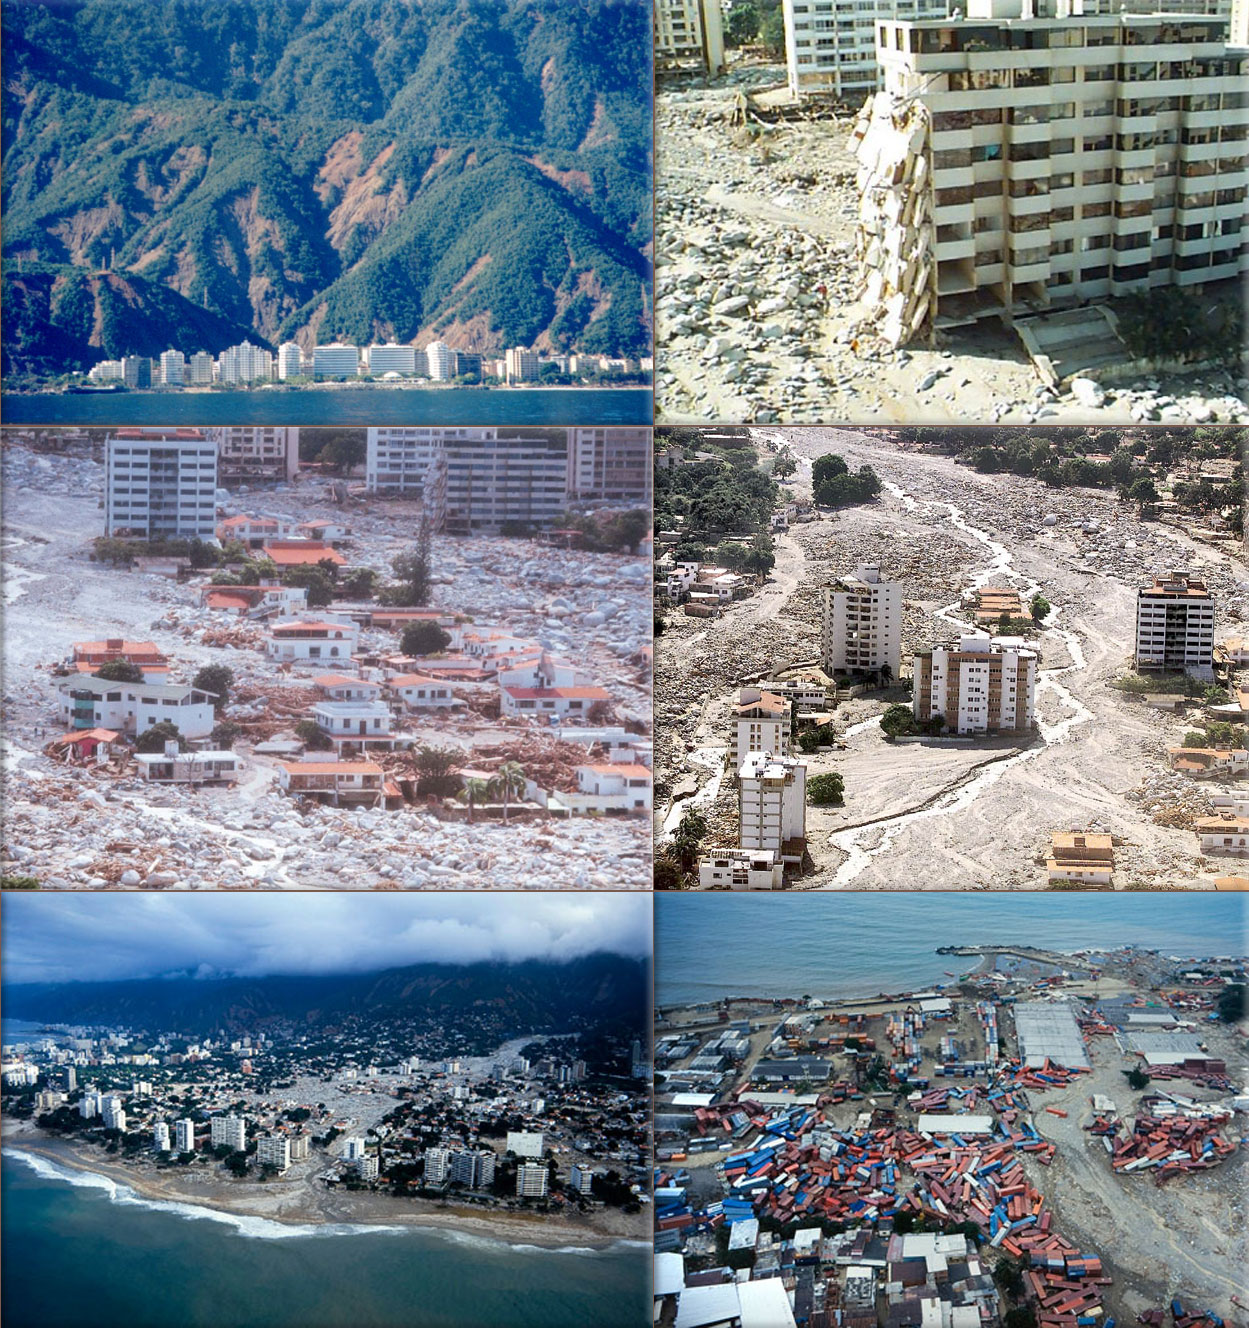 Vargas, Venezuela tragedy: resulting in tens of thousands of deaths, the destruction of thousands of homes, and the complete collapse of the state's infrastructure